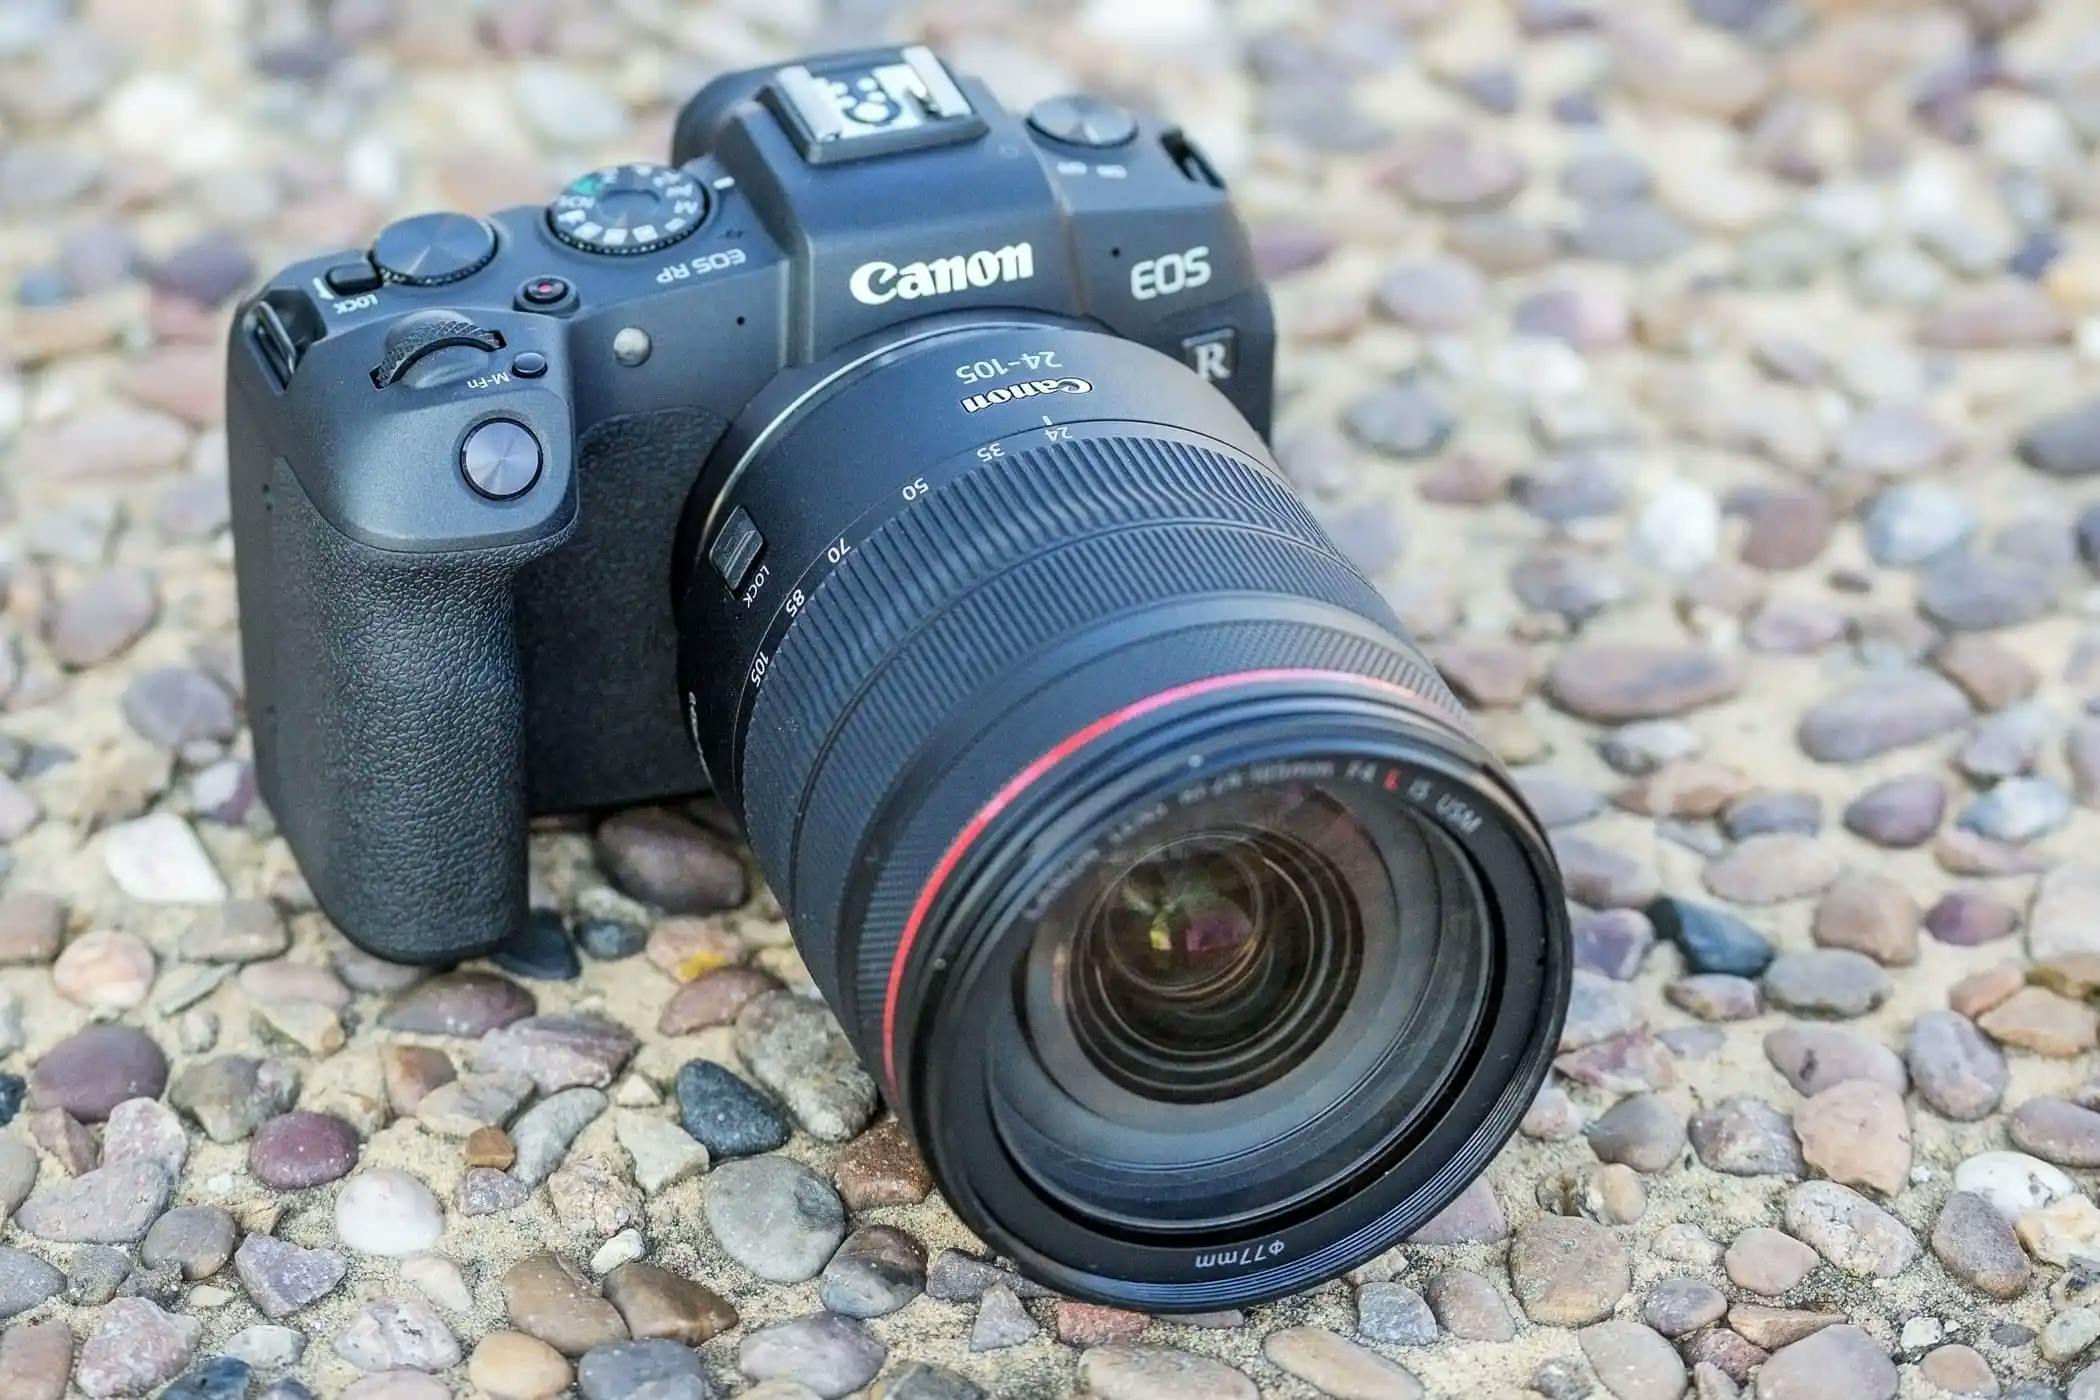 Cover Image for Exploring the Canon EOS RP: A Compact Full-Frame Solution